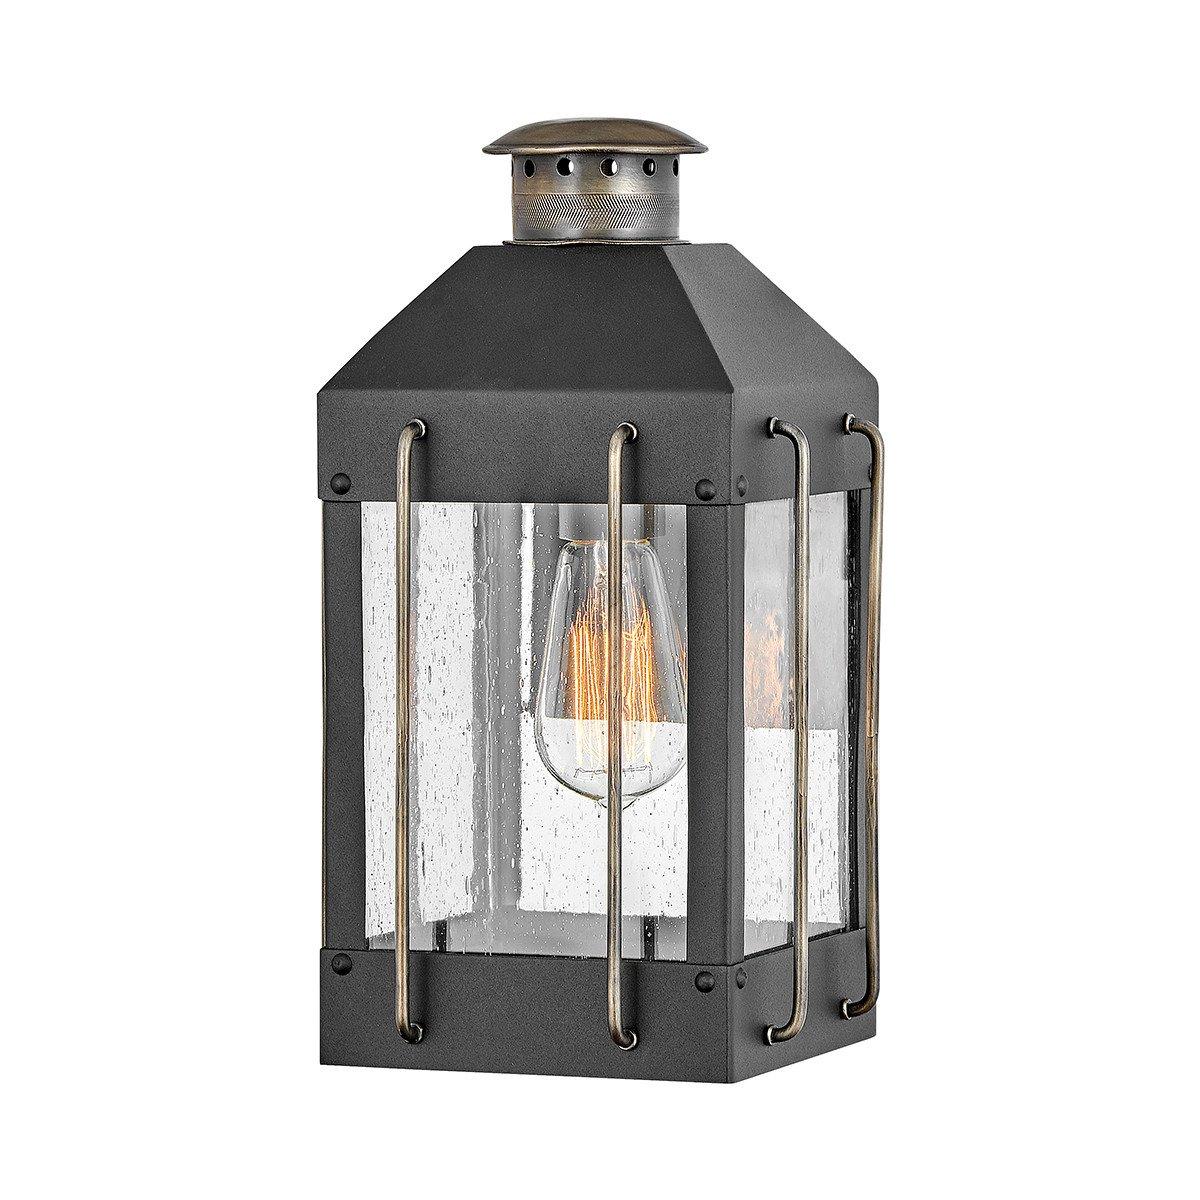 Hinkley Fitzgerald Outdoor Wall Lantern Textured Black with Burnished Bronze IP44